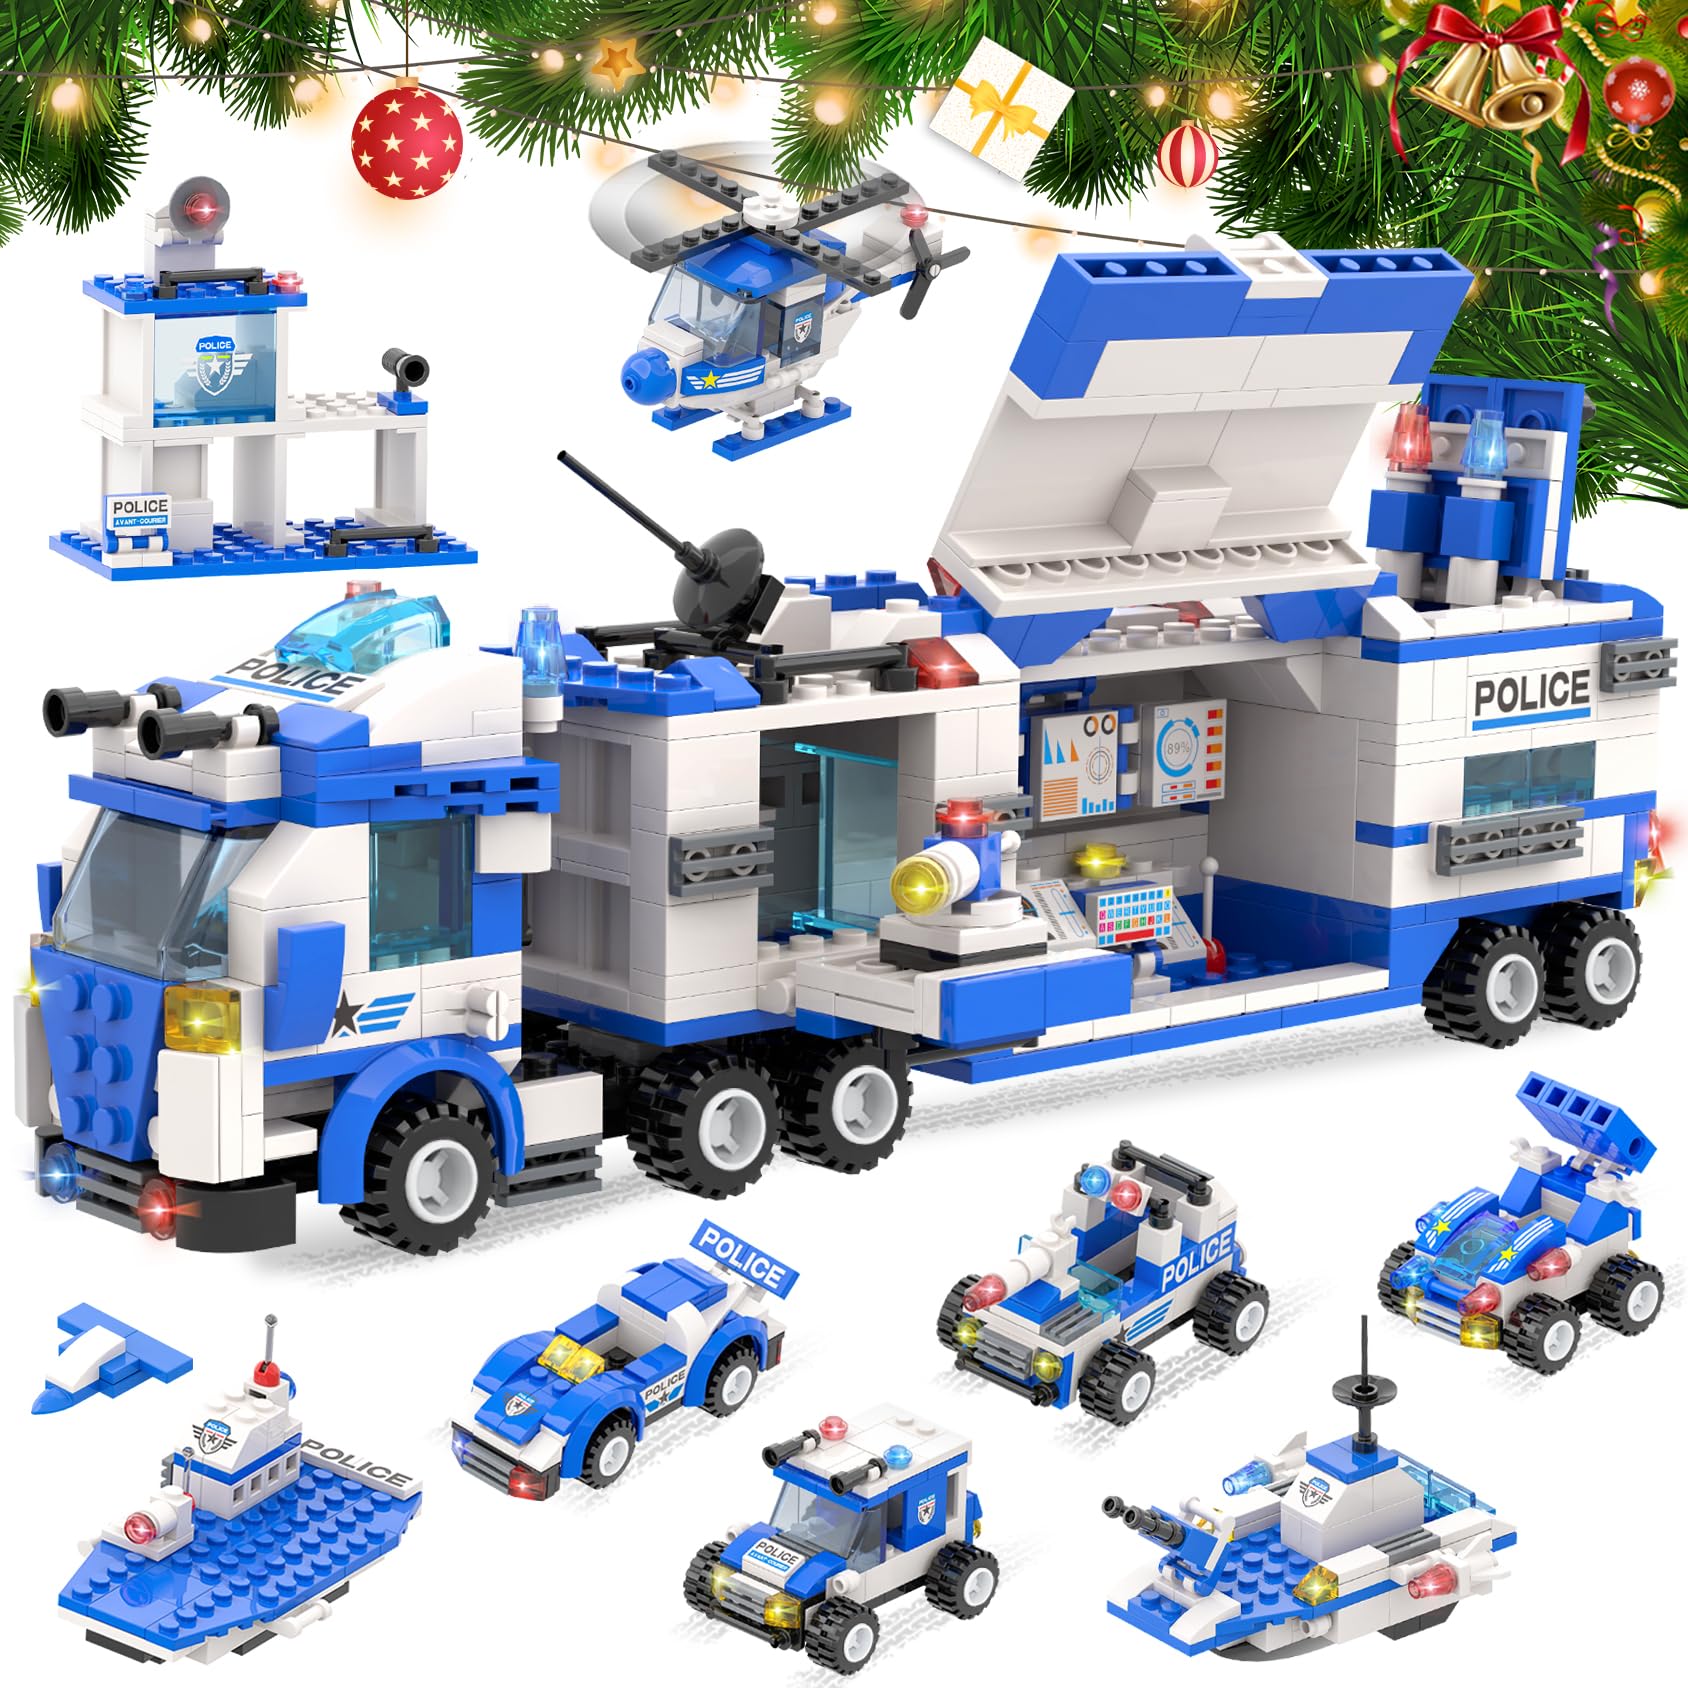 1338 Pieces City Police Mobile Command Center Truck Building Blocks Set with Police Station Police Car Helicopter Boat Be